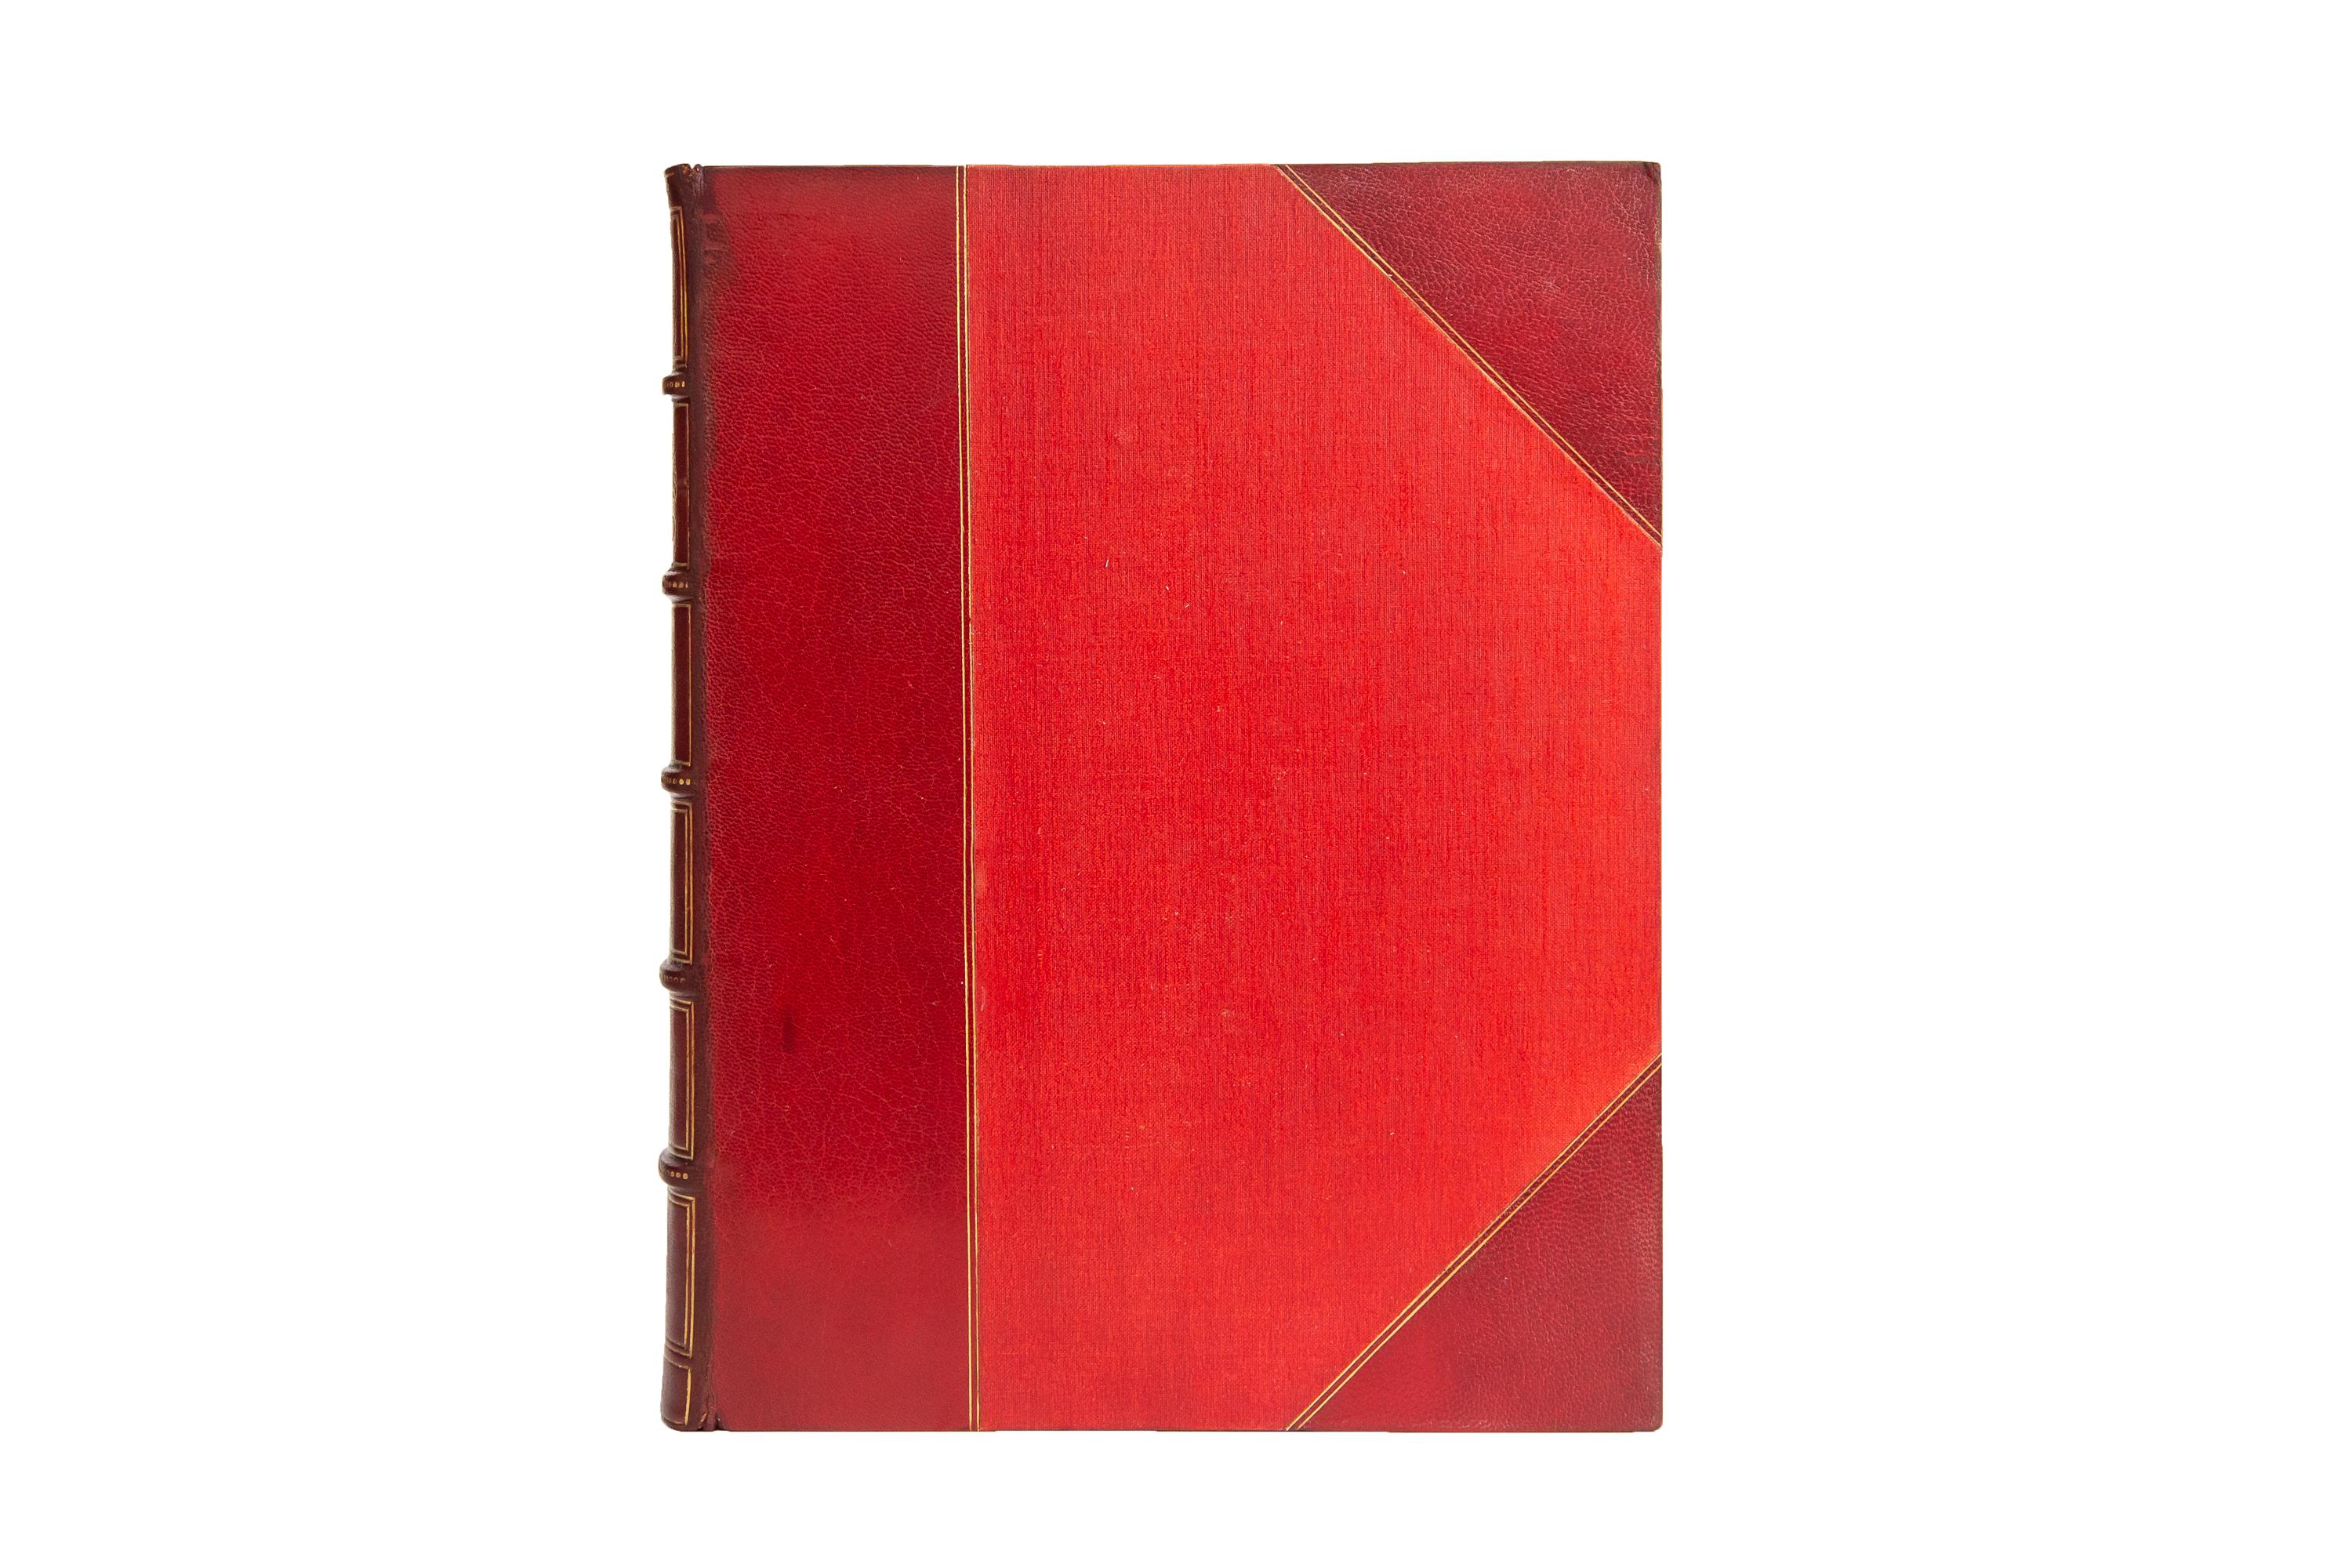 1 Volume. Andrew Lang, Prince Charles Edward. Limited Edition. Bound by Riviere & Son in 3/4 red morocco and linen boards, bordered in gilt tooling. Raised bands, dotted in gilt tooling with panels displaying borders, royal detailing, and label